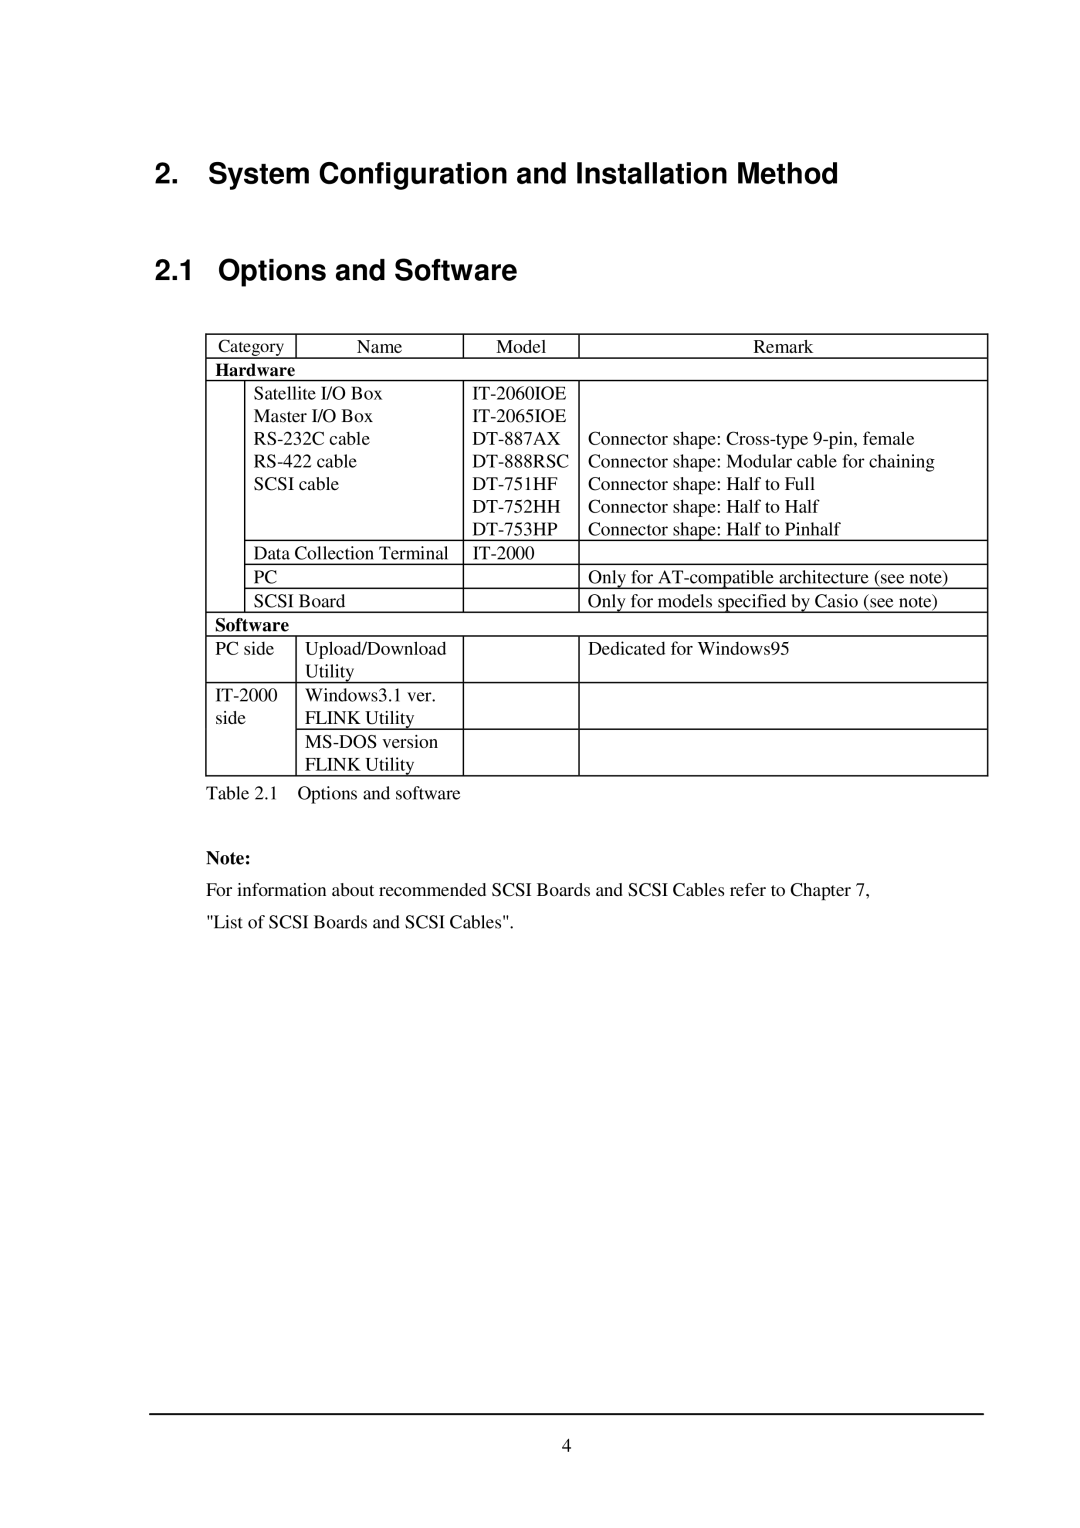 Casio IT-2000 installation manual System Configuration and Installation Method, Options and Software 